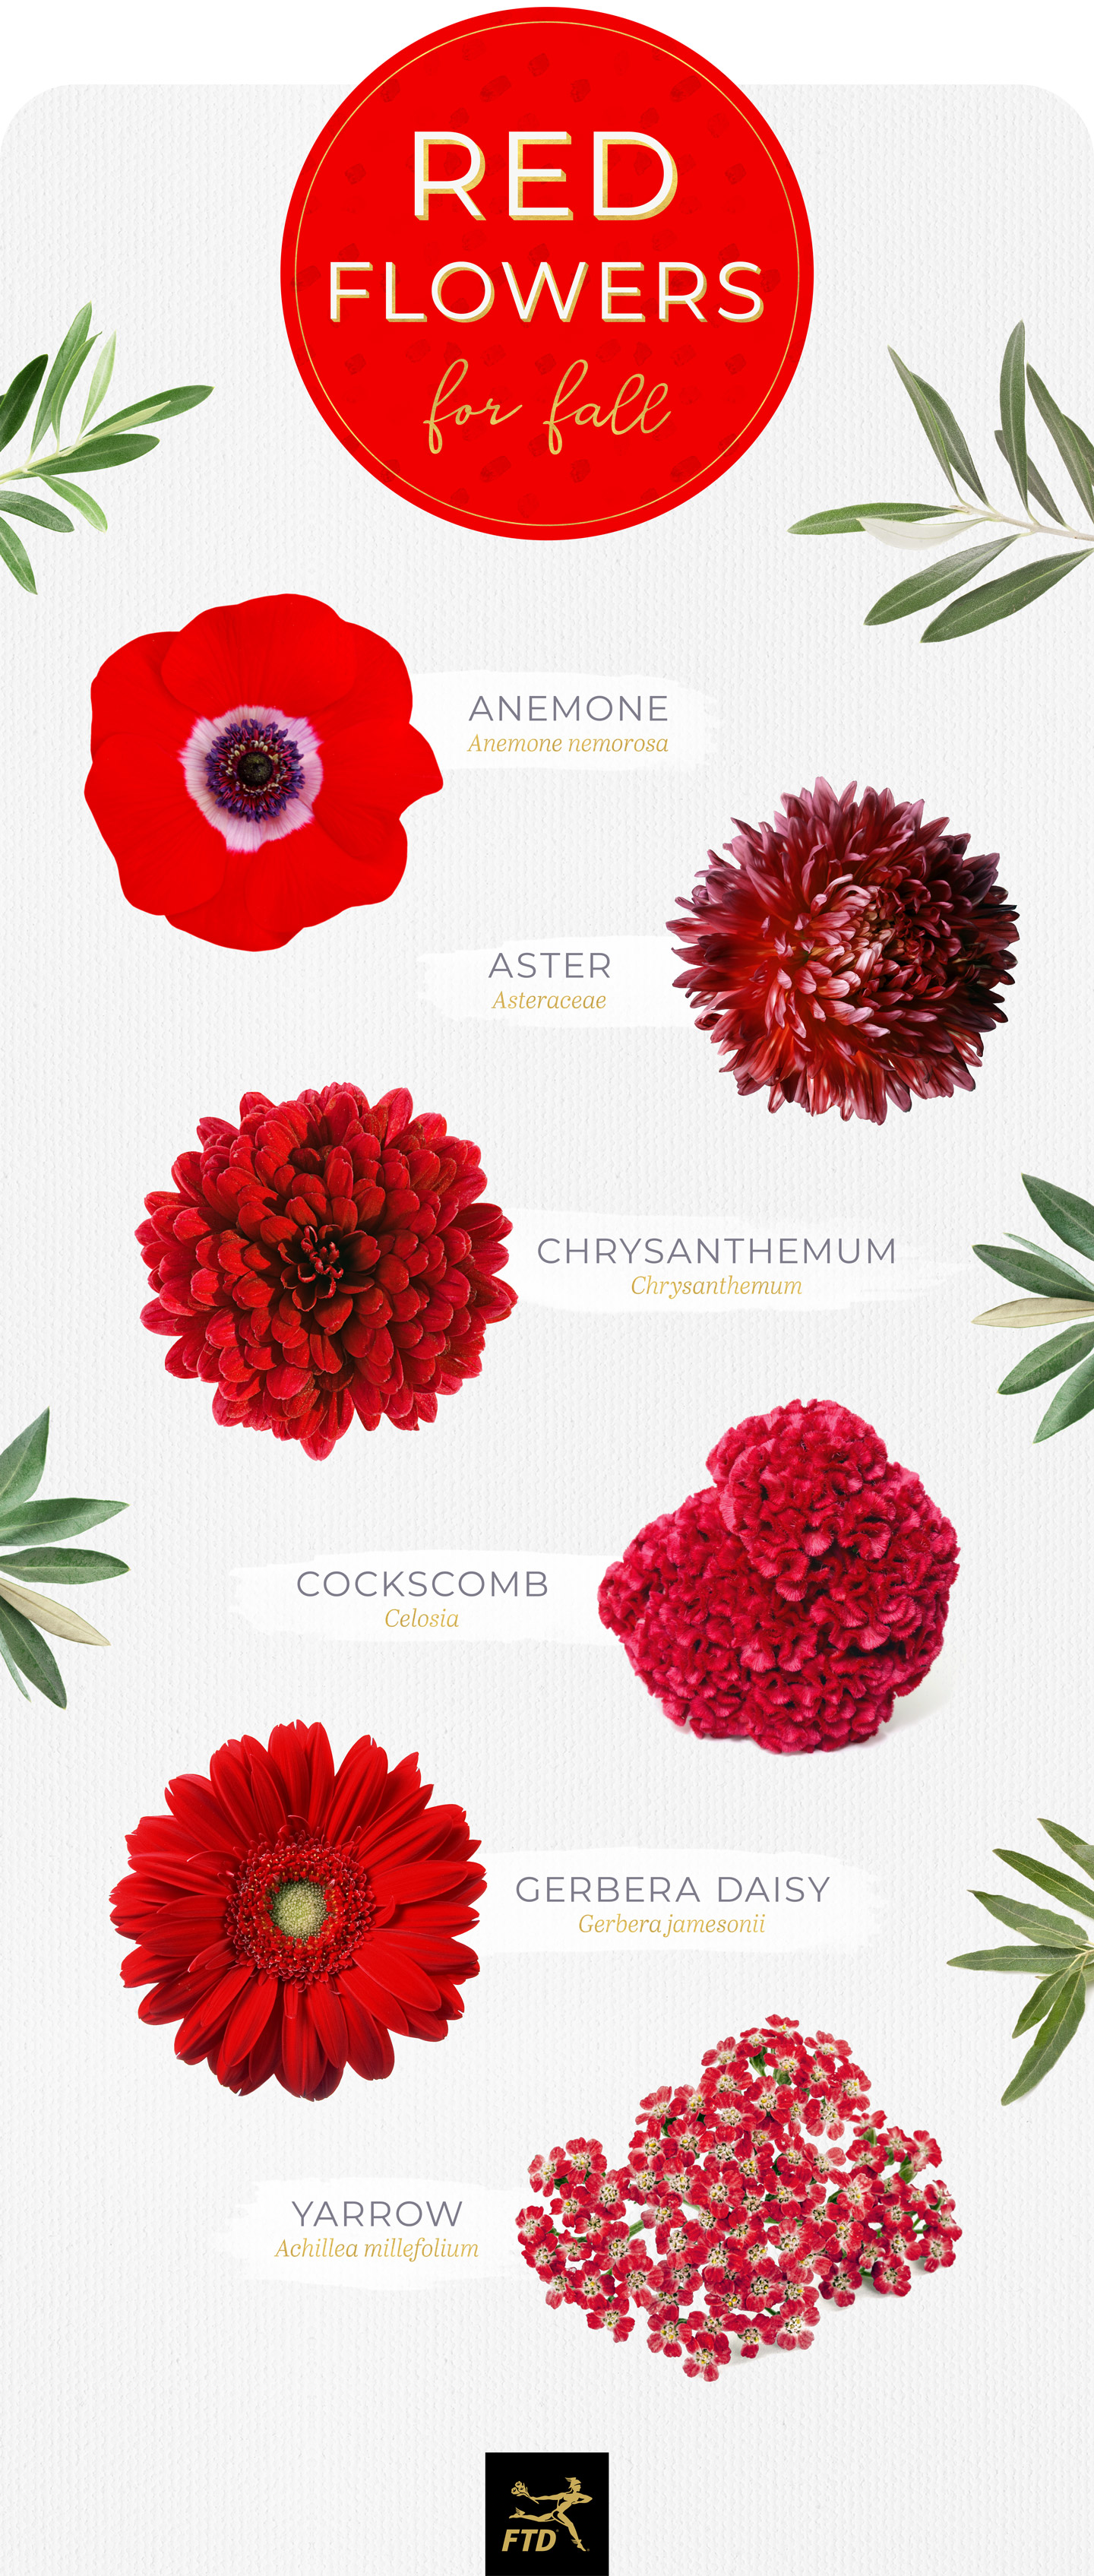 40 Types of Red Flowers - FTD.com